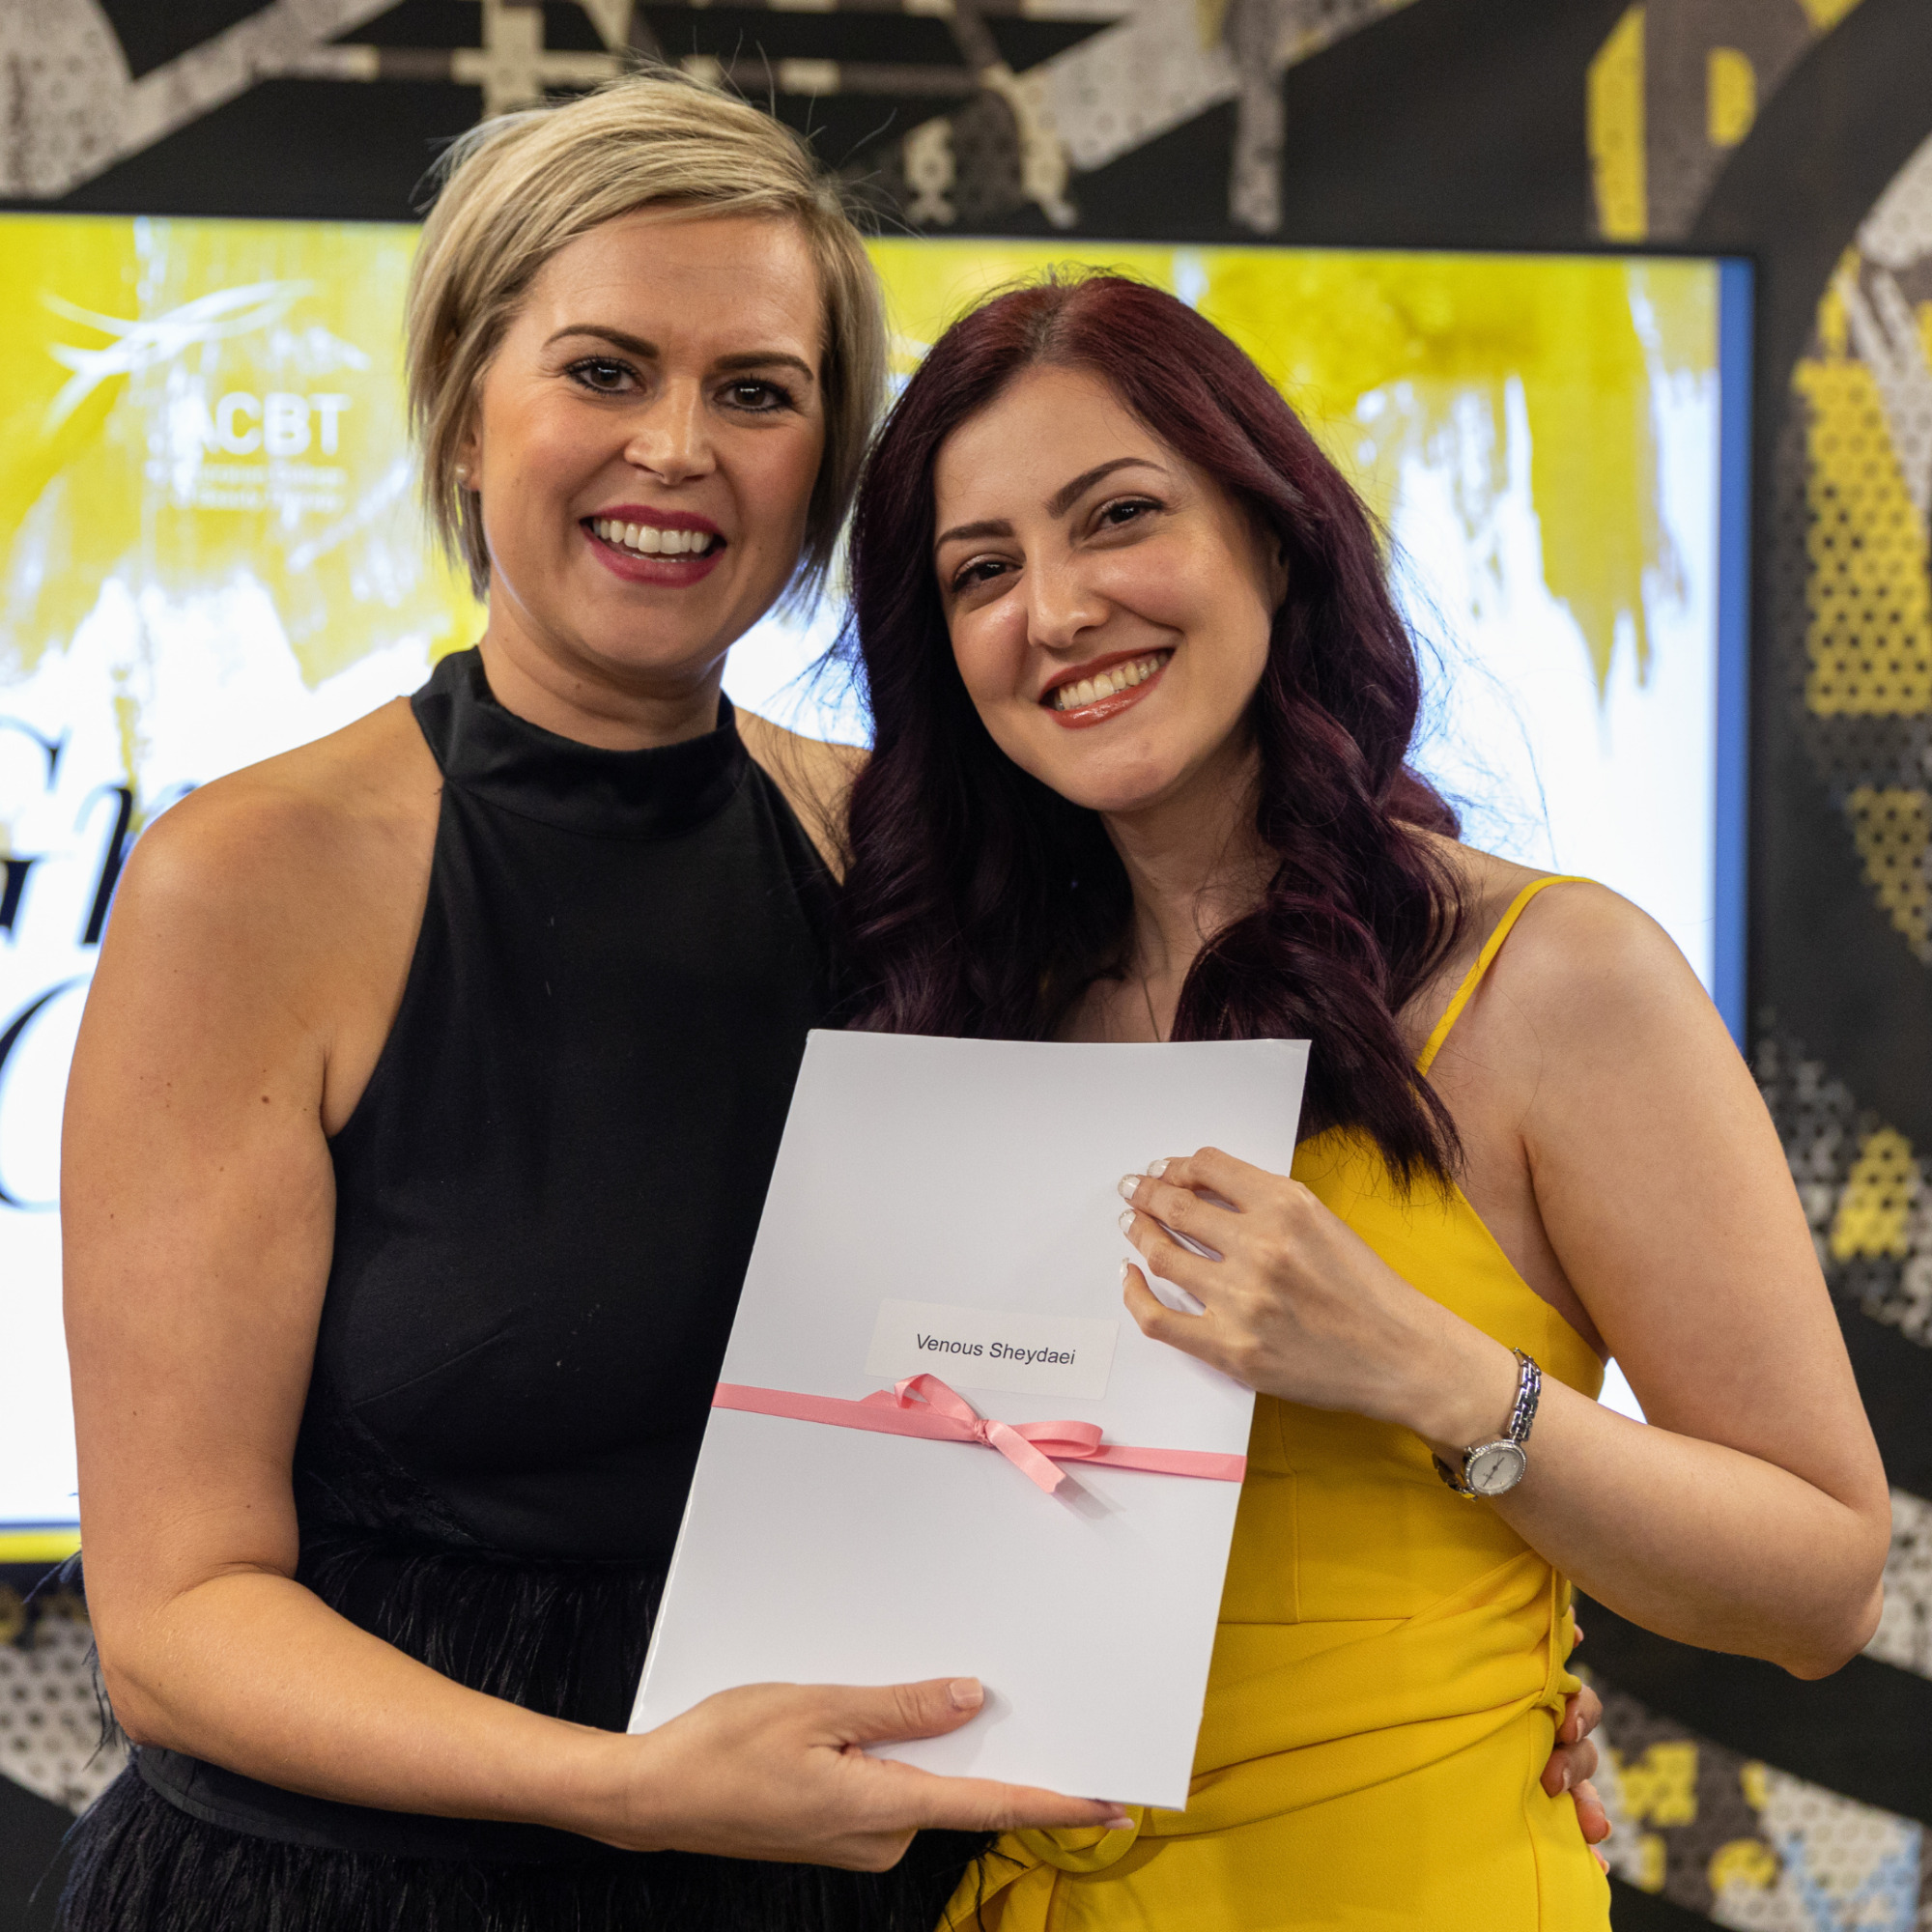 ACBT Graduate, Venus, accepting her certificate from lecturer, Kirsty. Venus is wearing a yellow dress and Kirsty is wearing a black dress. Both ladies are smiling.